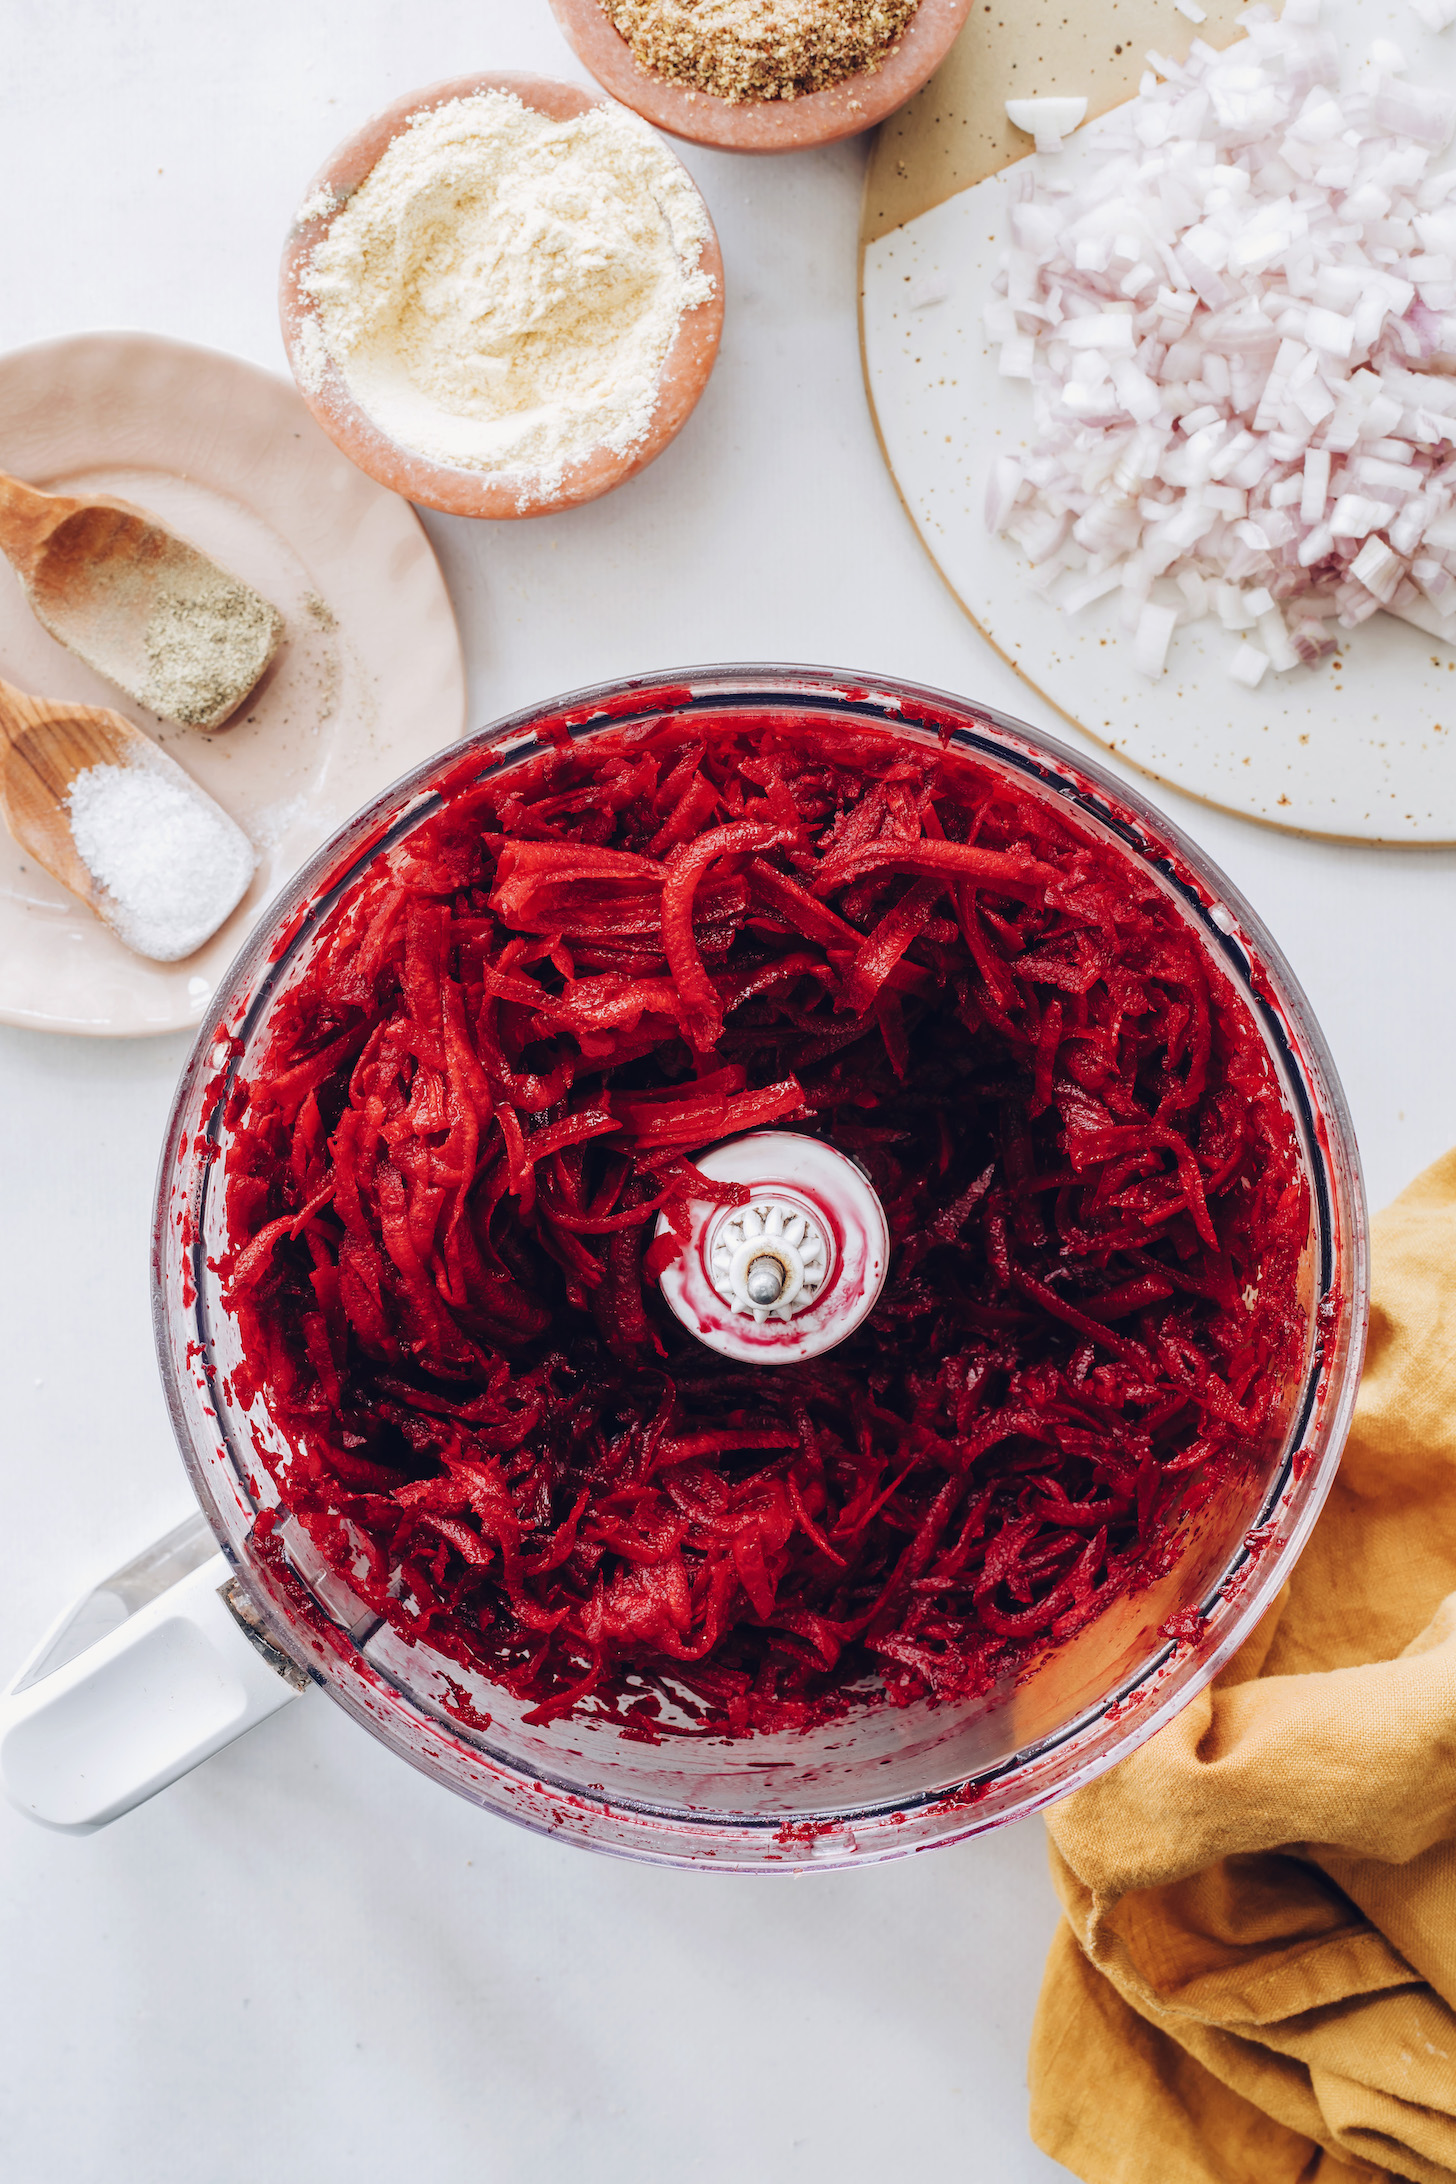 Shredded beets in a food processor